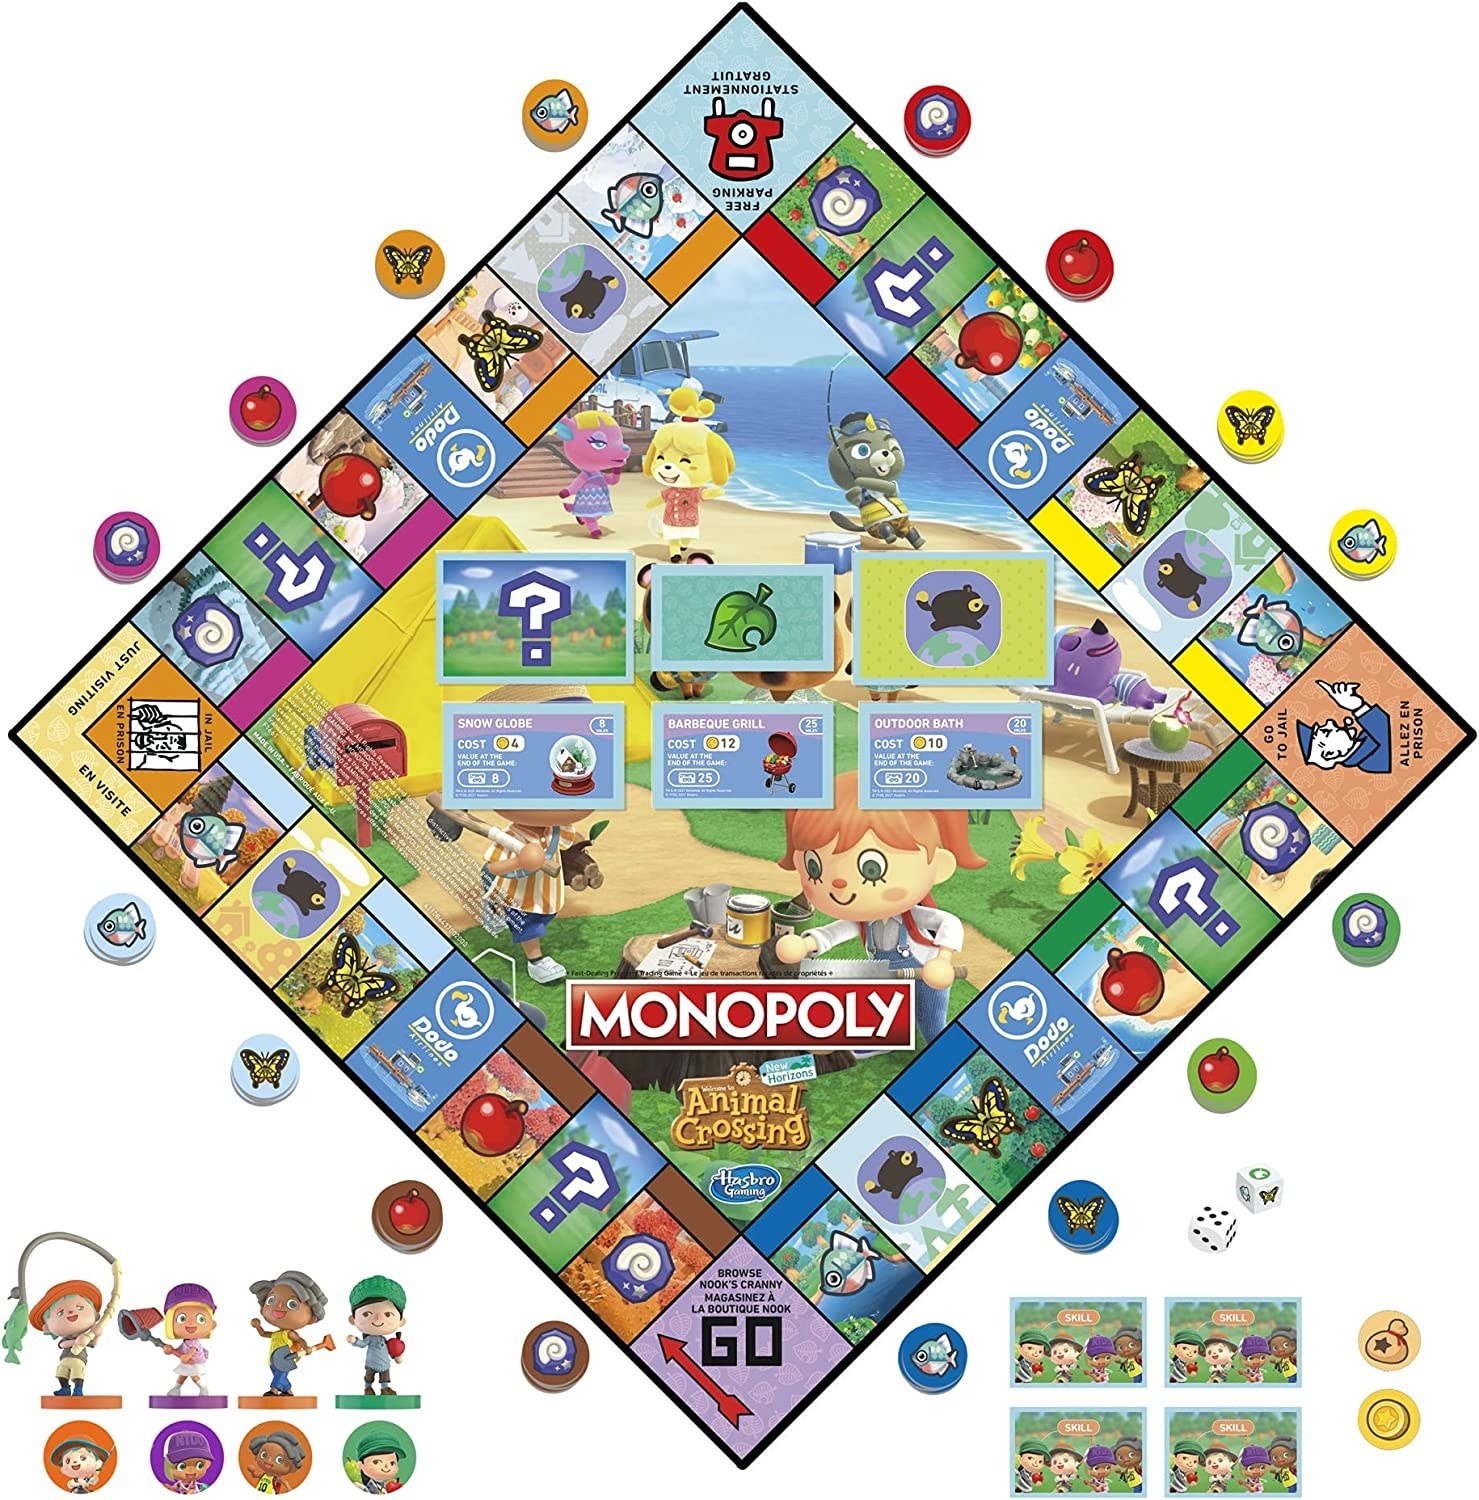 an overhead photo of the game board and pieces against a plain background